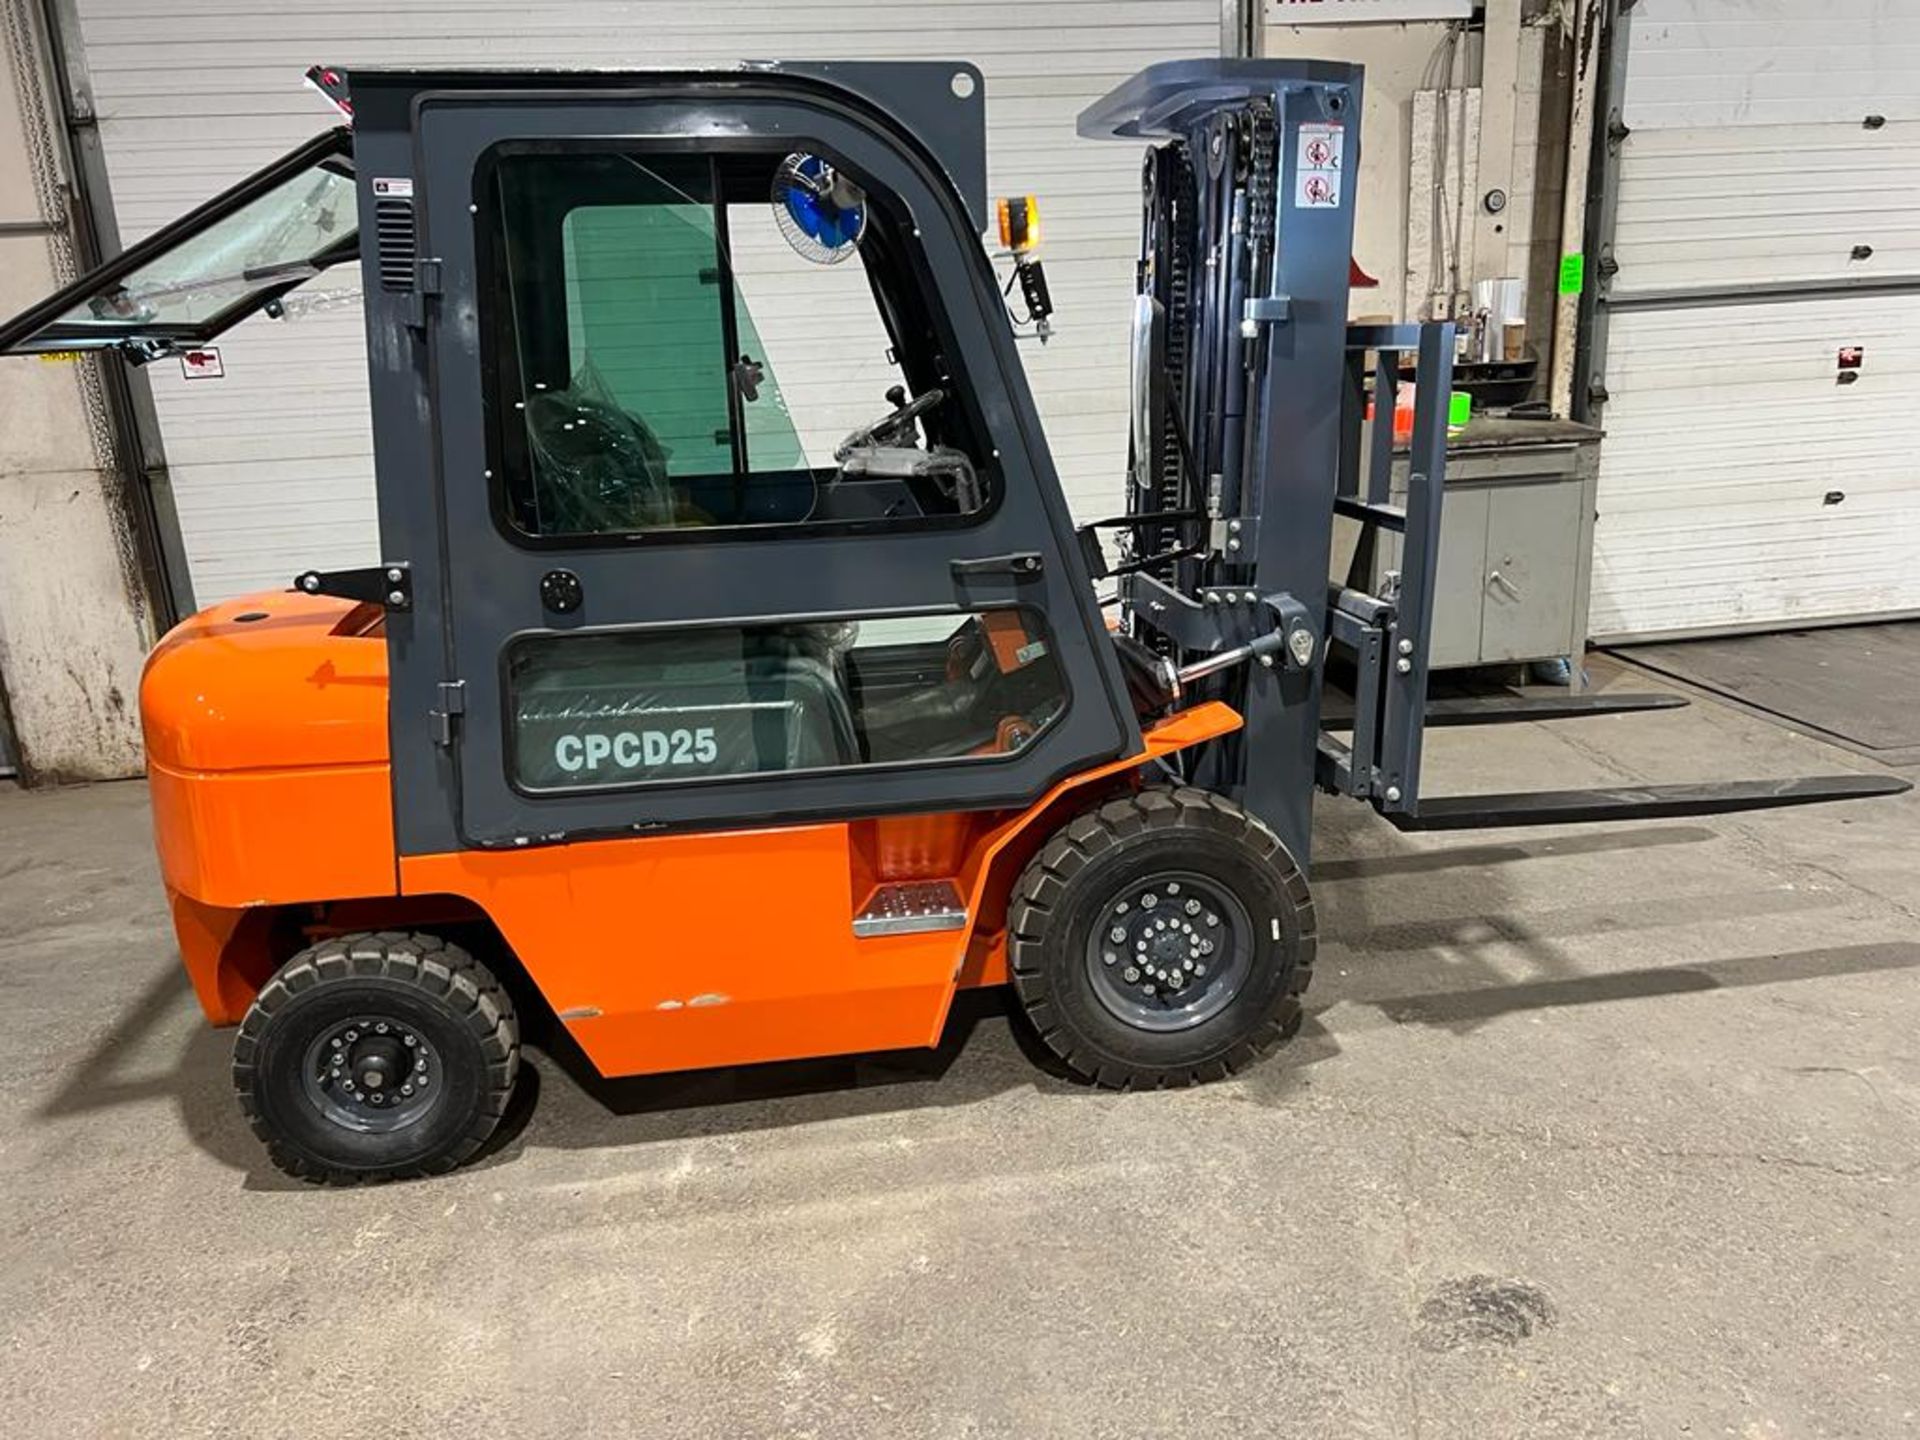 Brand New OMEGA CPCD25 Outdoor 5,000lbs Capacity Forklift - Diesel Powered, 3-stage Mast with